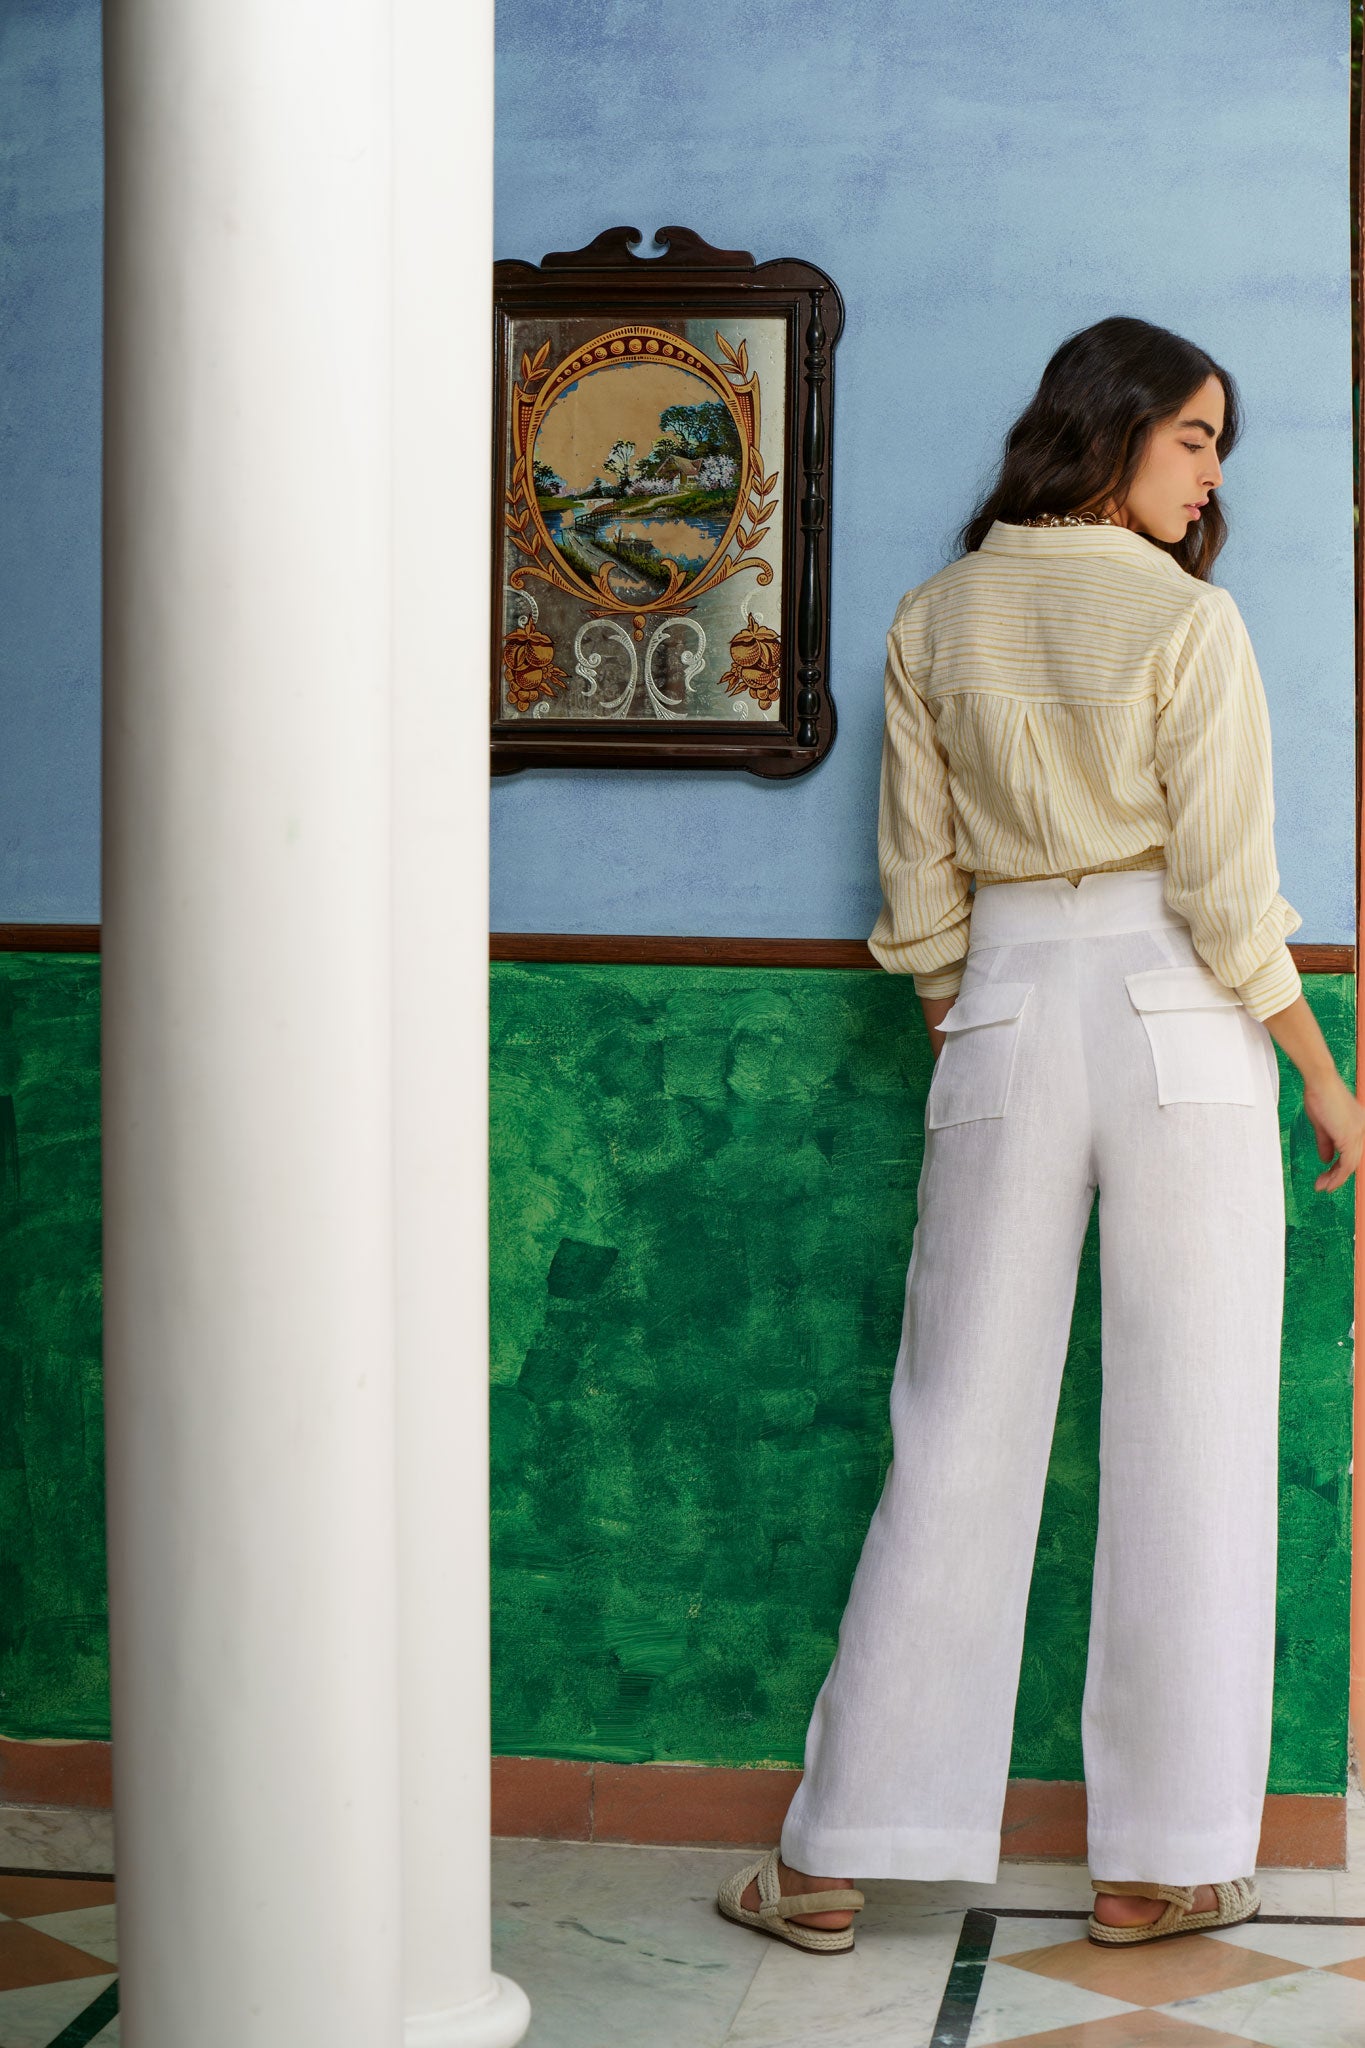 Buy Cream Trousers  Pants for Women by Marks  Spencer Online  Ajiocom